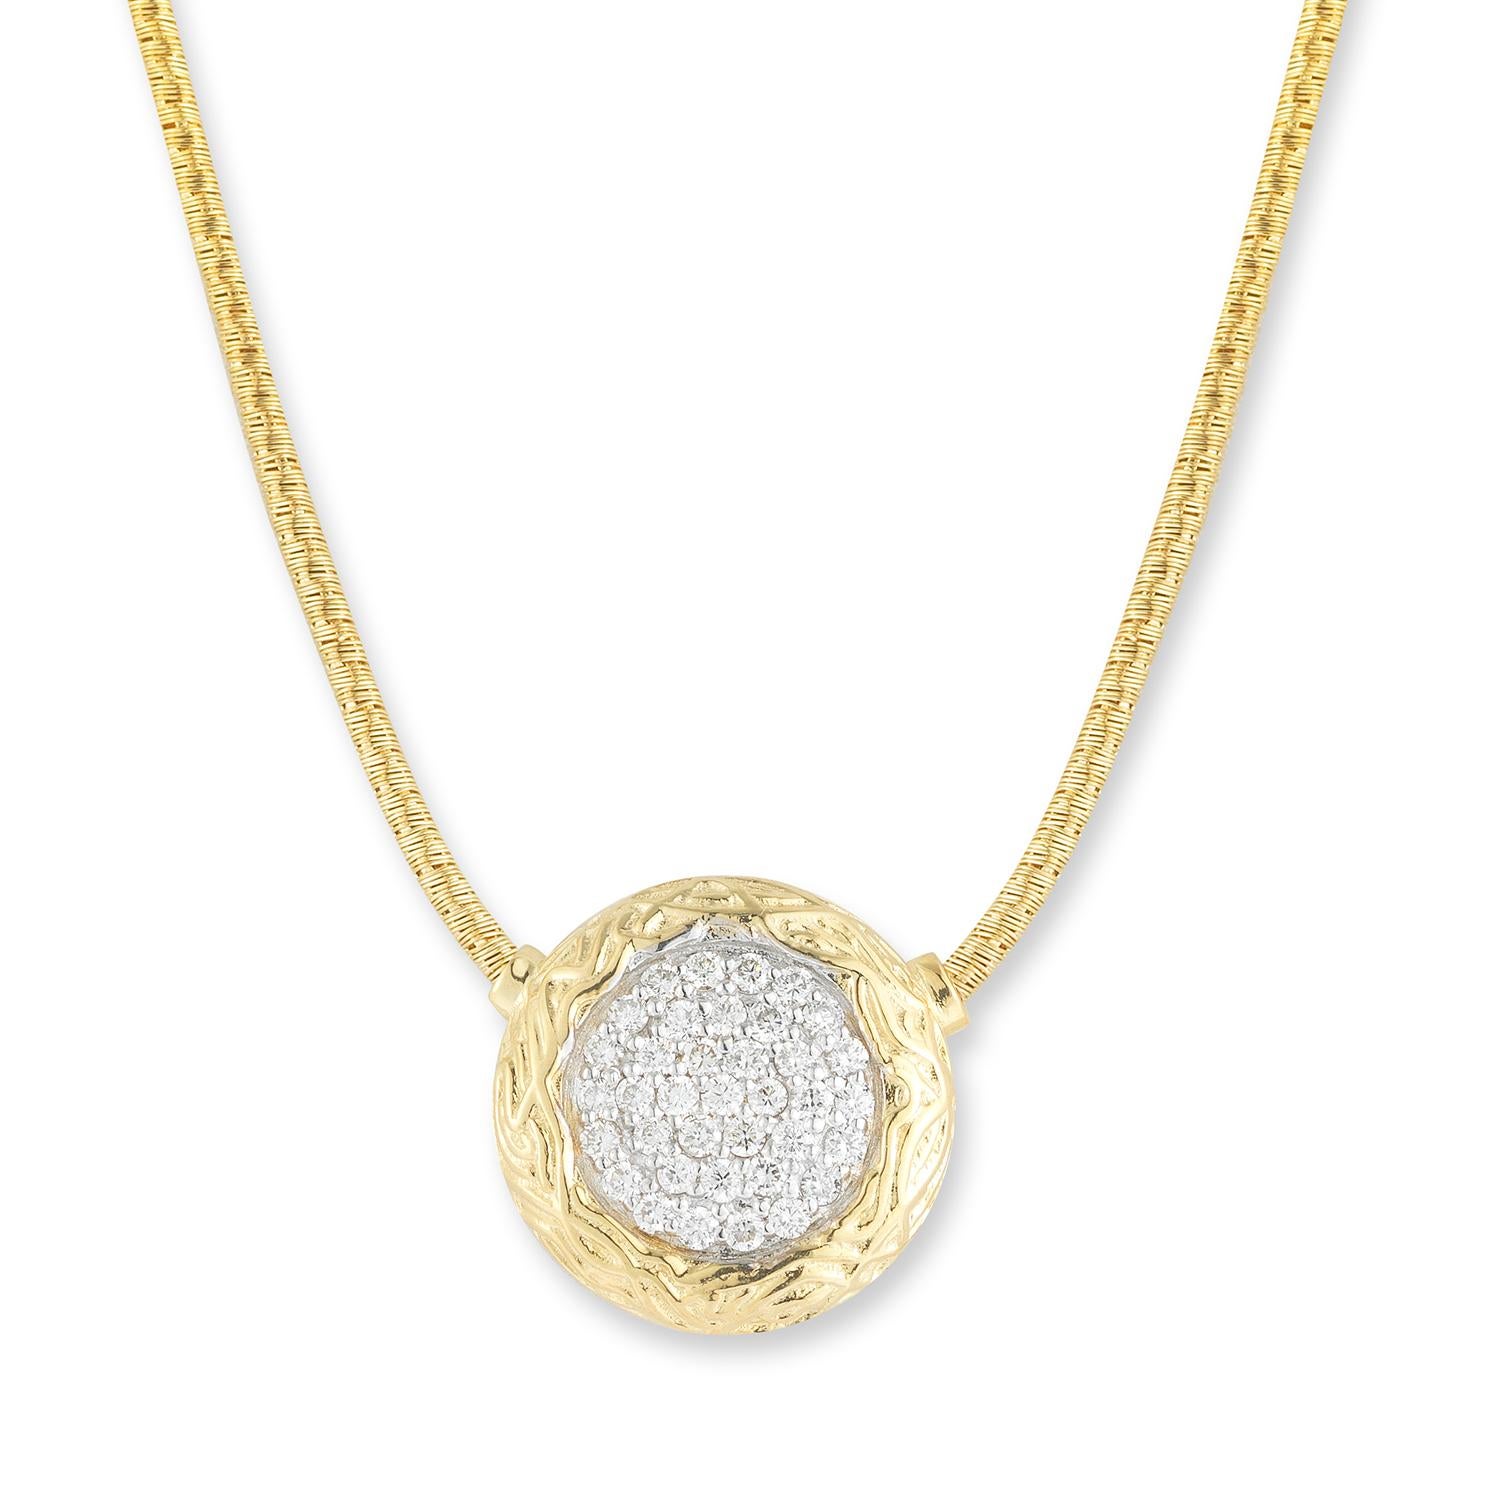 14 Karat Yellow Gold Hand-Crafted Polish and Texture-Finished Circle Motif Mesh Necklace, Enhanced with 0.37 Carats of a Pave Set Circle Diamond Center.
